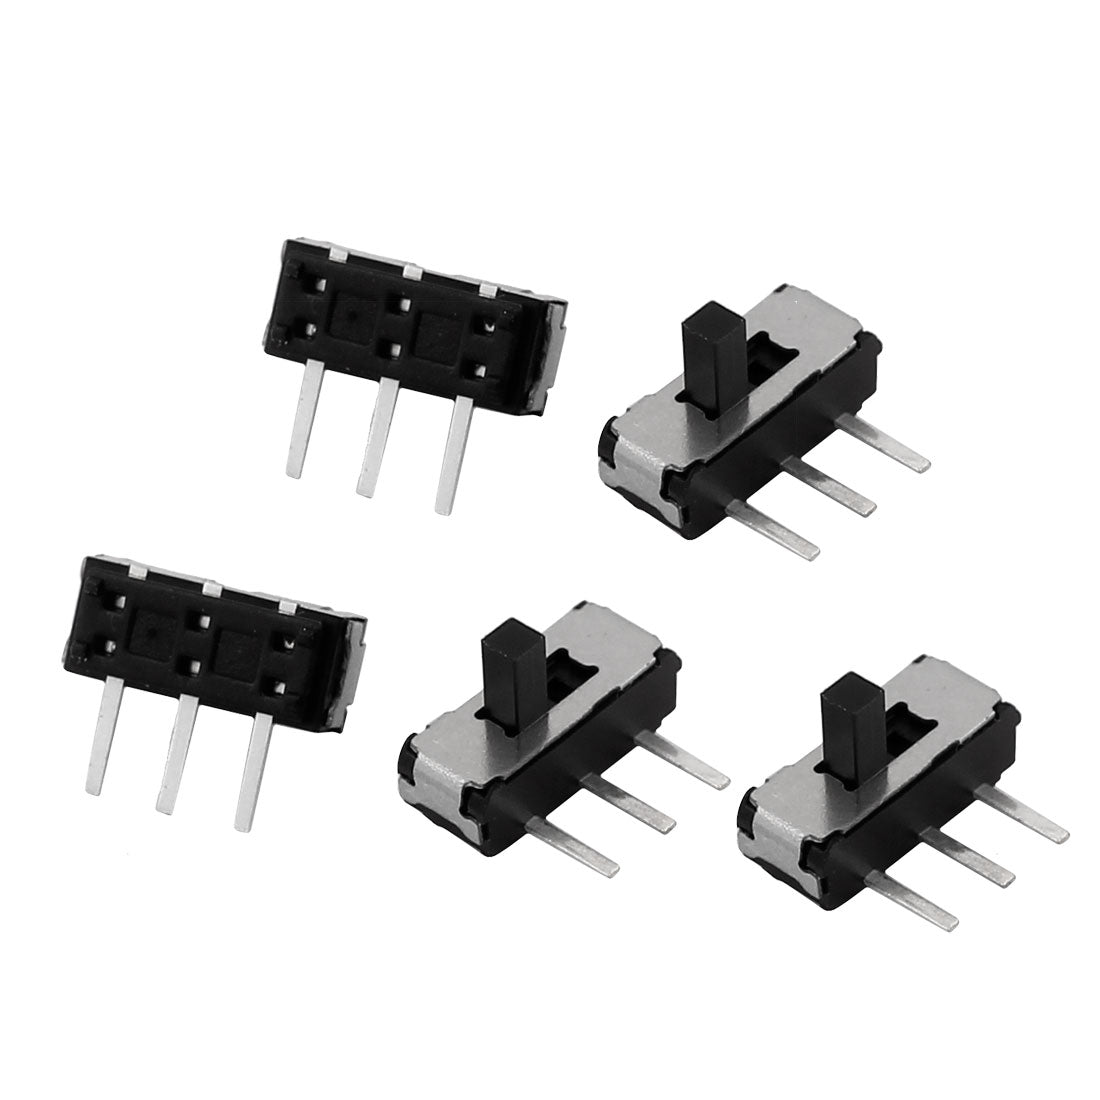 uxcell Uxcell 5pcs 2 Position 3P SPDT SMT Surface Mounted Devices Self Locking Mini Power Slide Switch 9mmx3mmx3mm